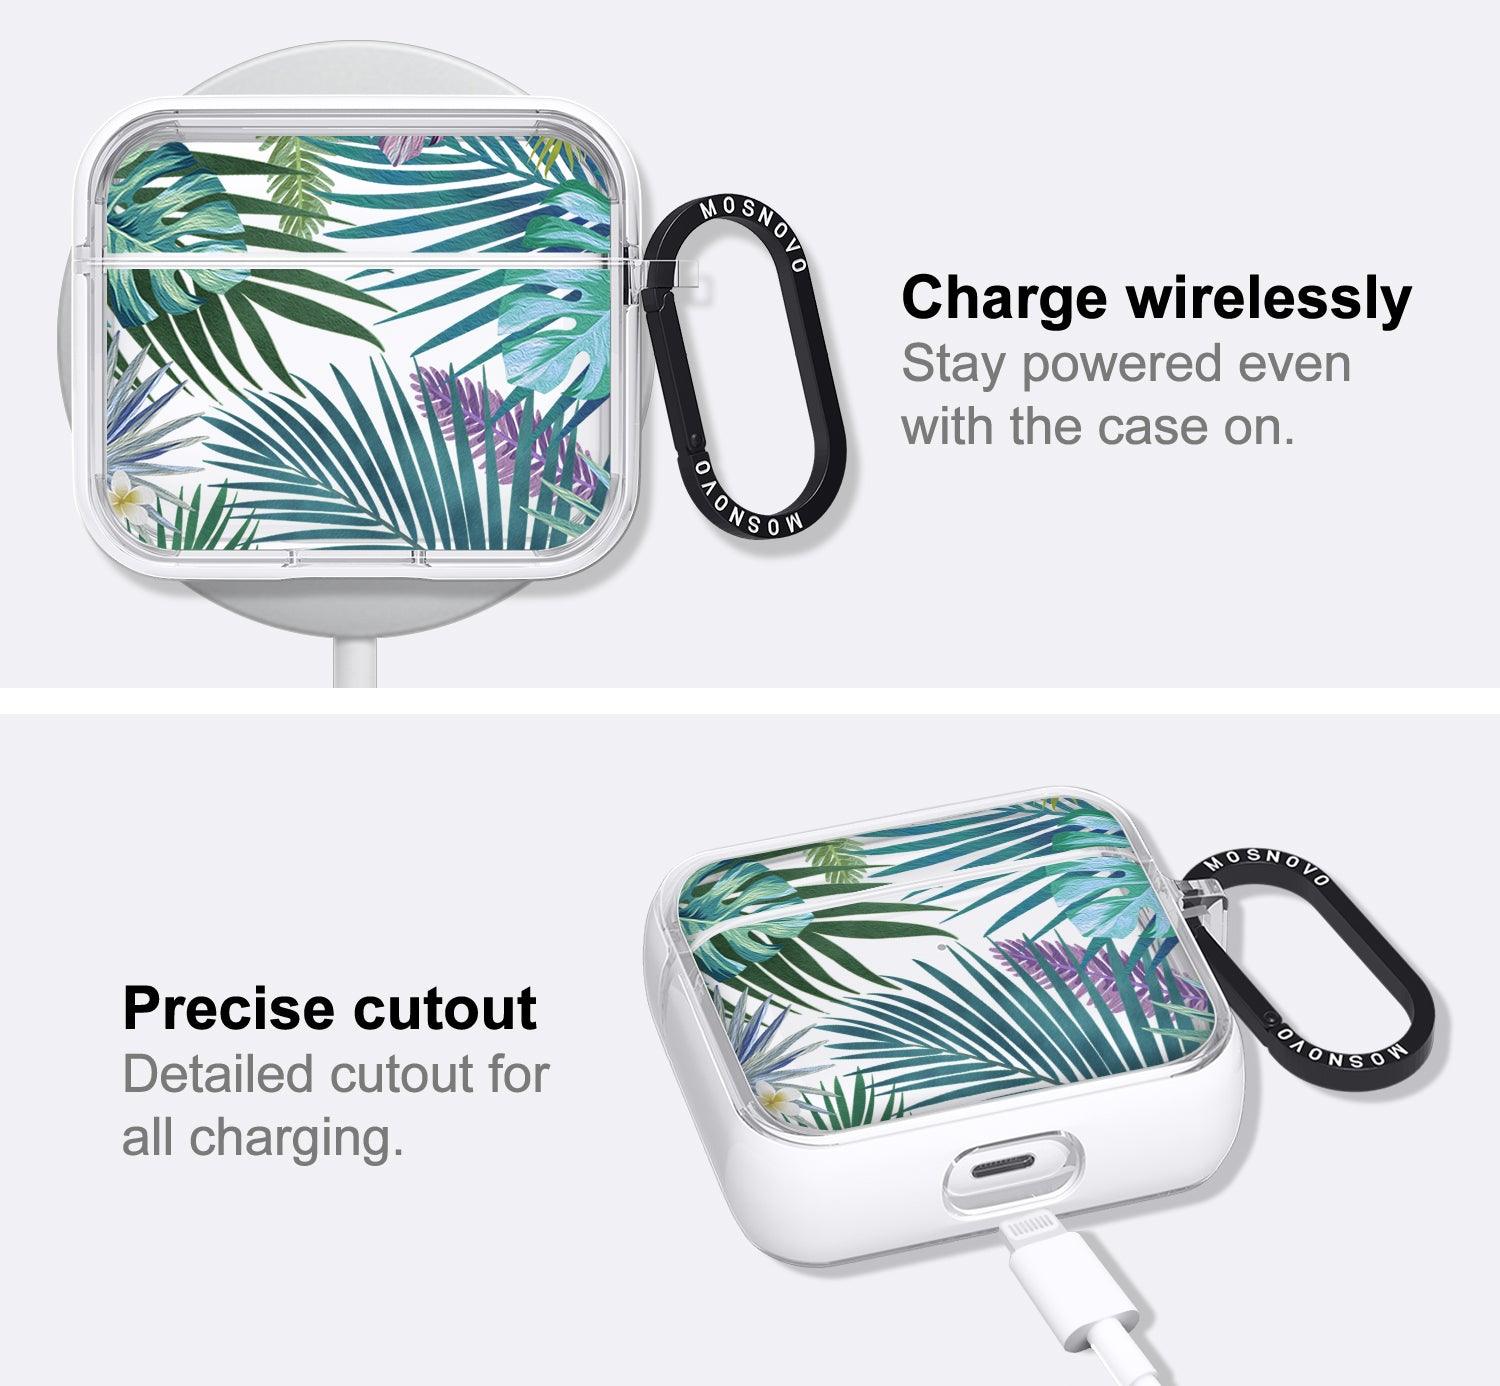 Tropical Forests AirPods 3 Case (3rd Generation) - MOSNOVO